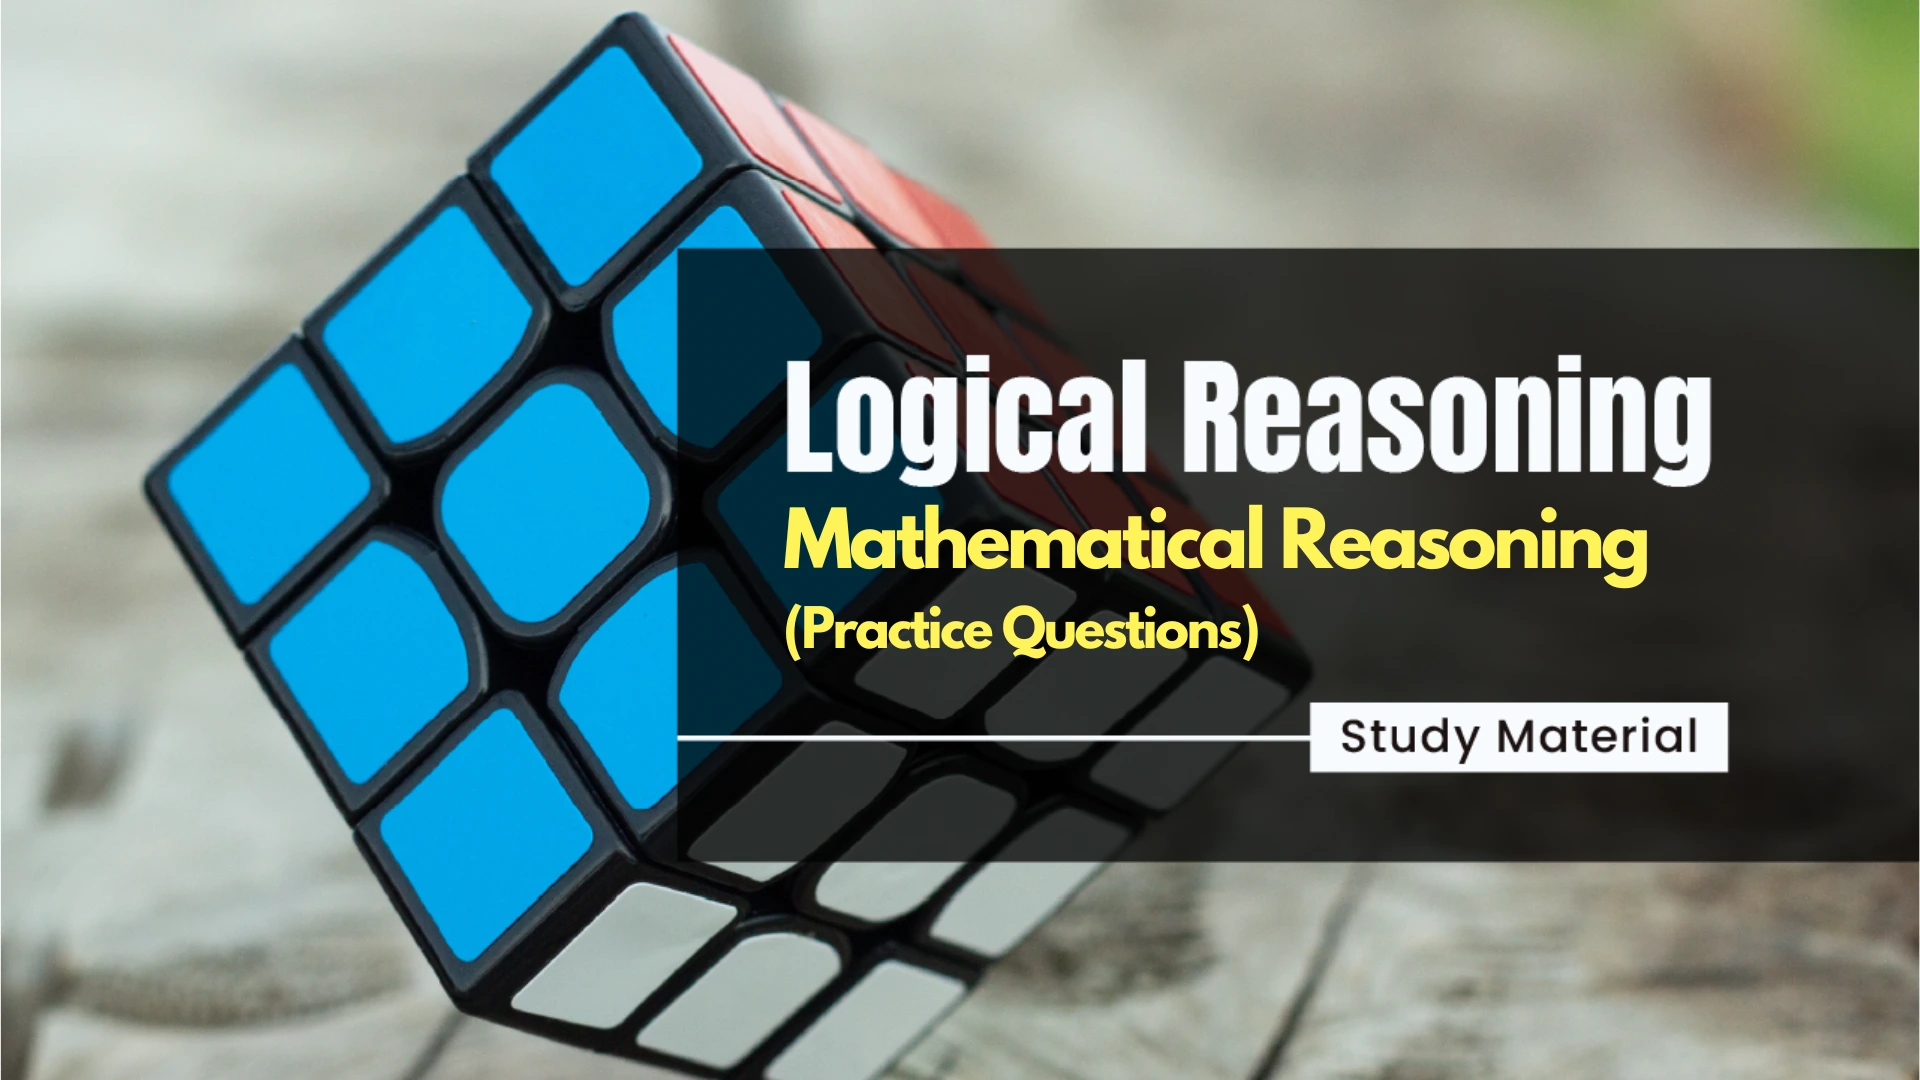 Mathematical Reasoning Questions - Top 10 MCQs with Solutions